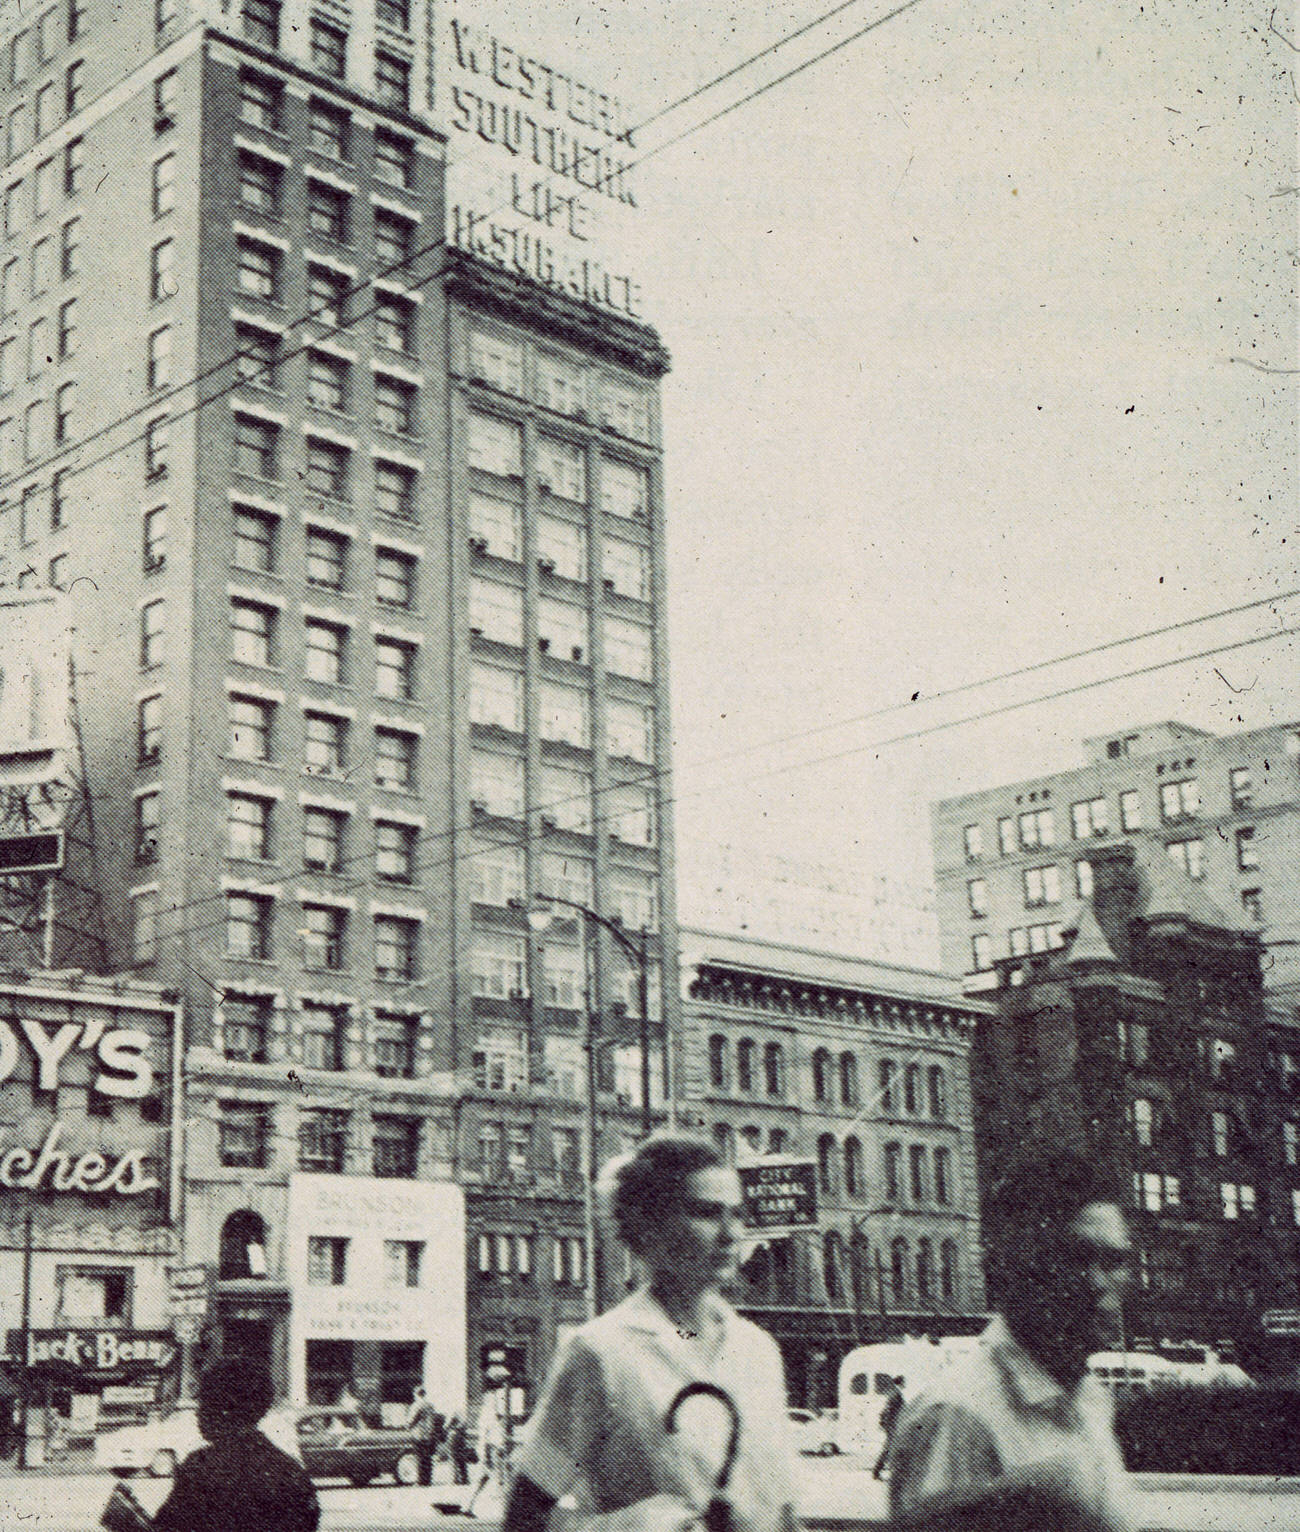 Broad and High Streets with Roy's Jewelers and Marzetti's Restaurant at 16 East Broad Street, 1962.